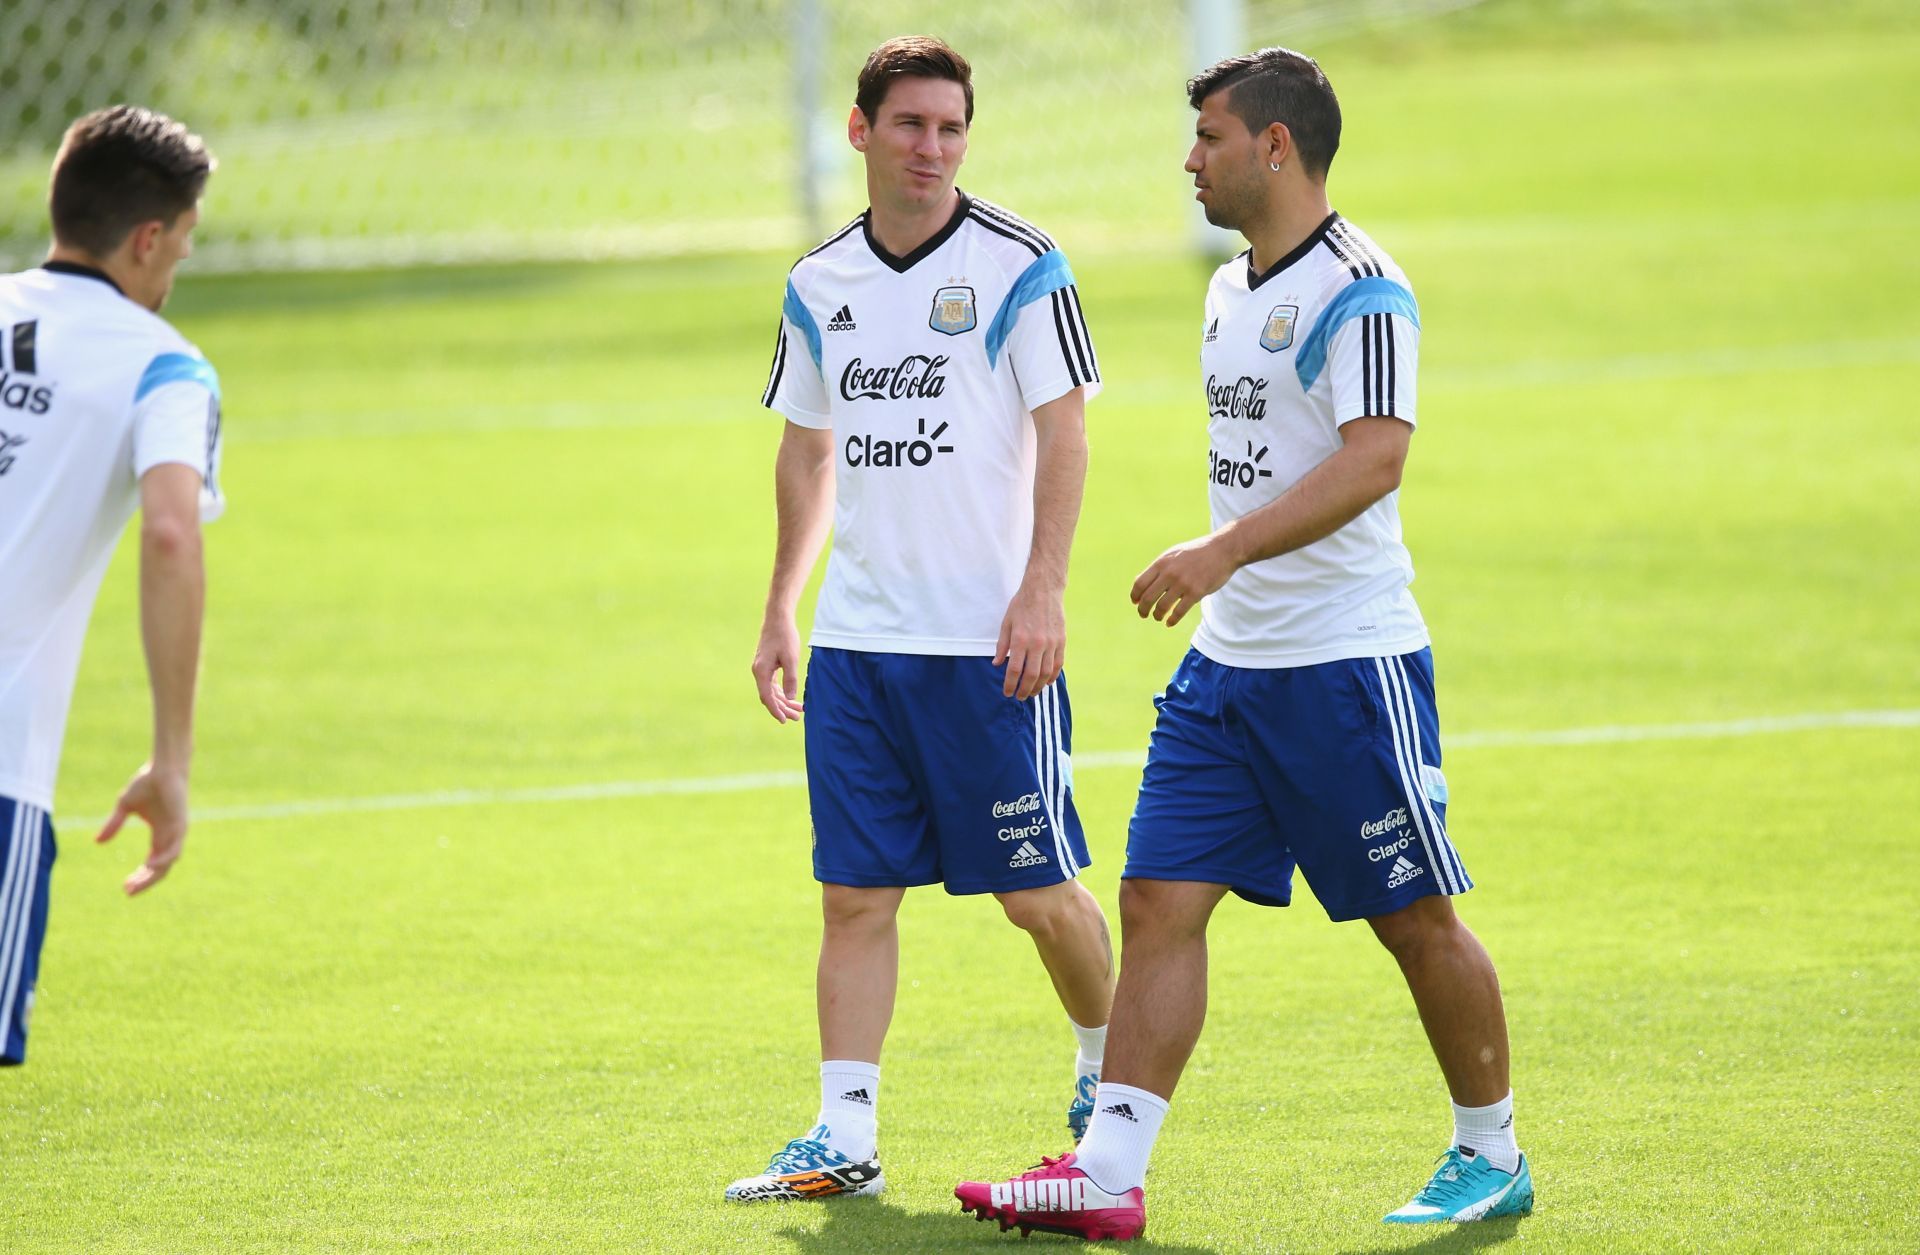 Aguero jokes that hell be joining Messi in the United States.